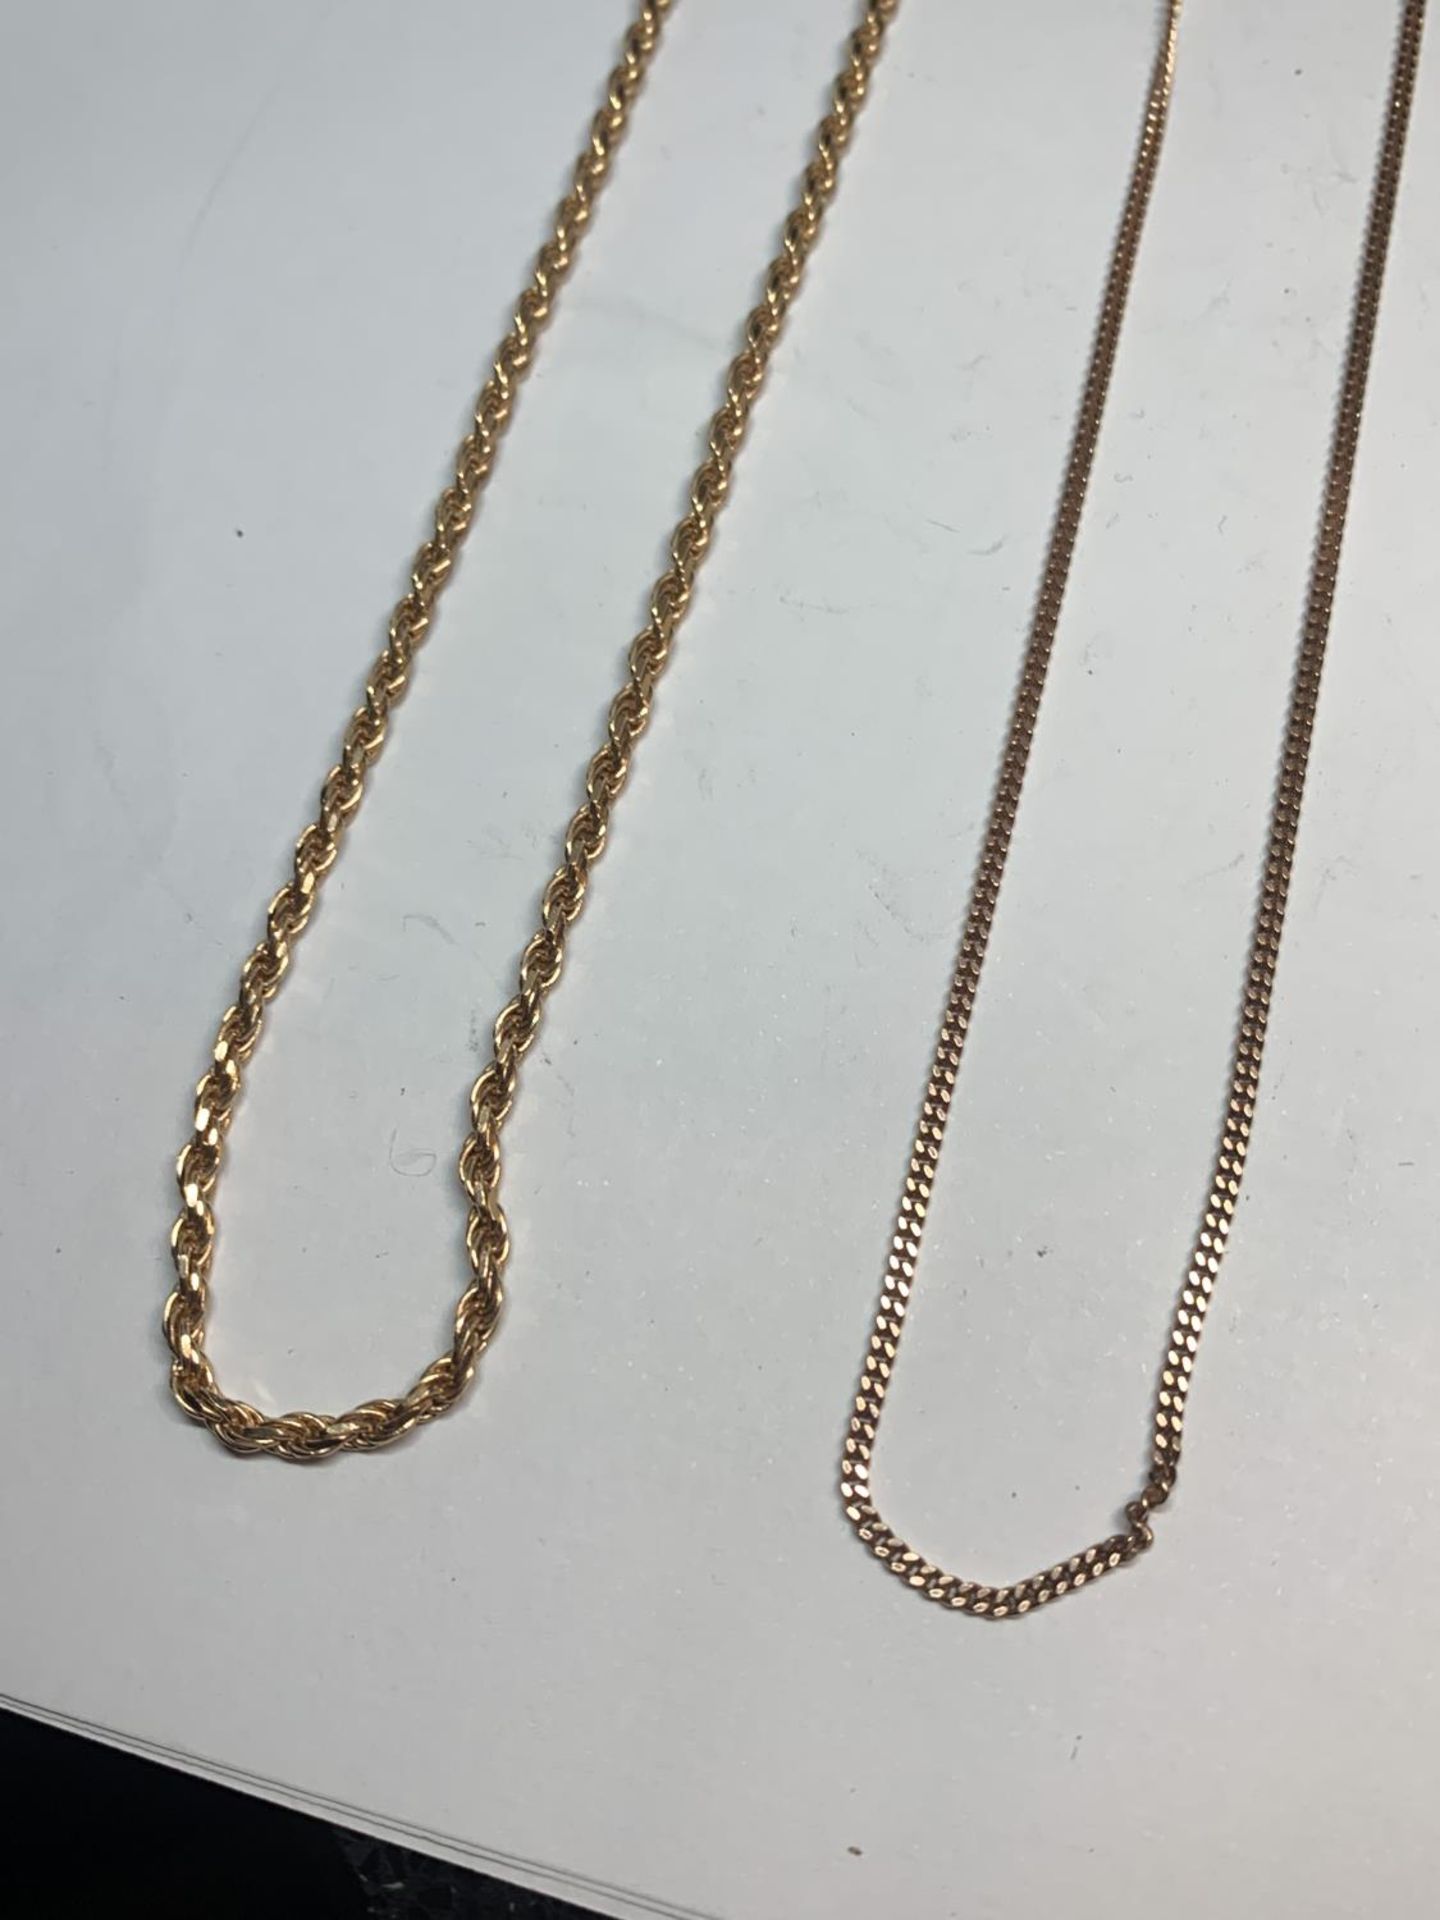 THREE ITEMS OF SILVER GILT JEWELLERY TO INCLUDE A BRACELET AND TWO NECKLACES - Image 2 of 2